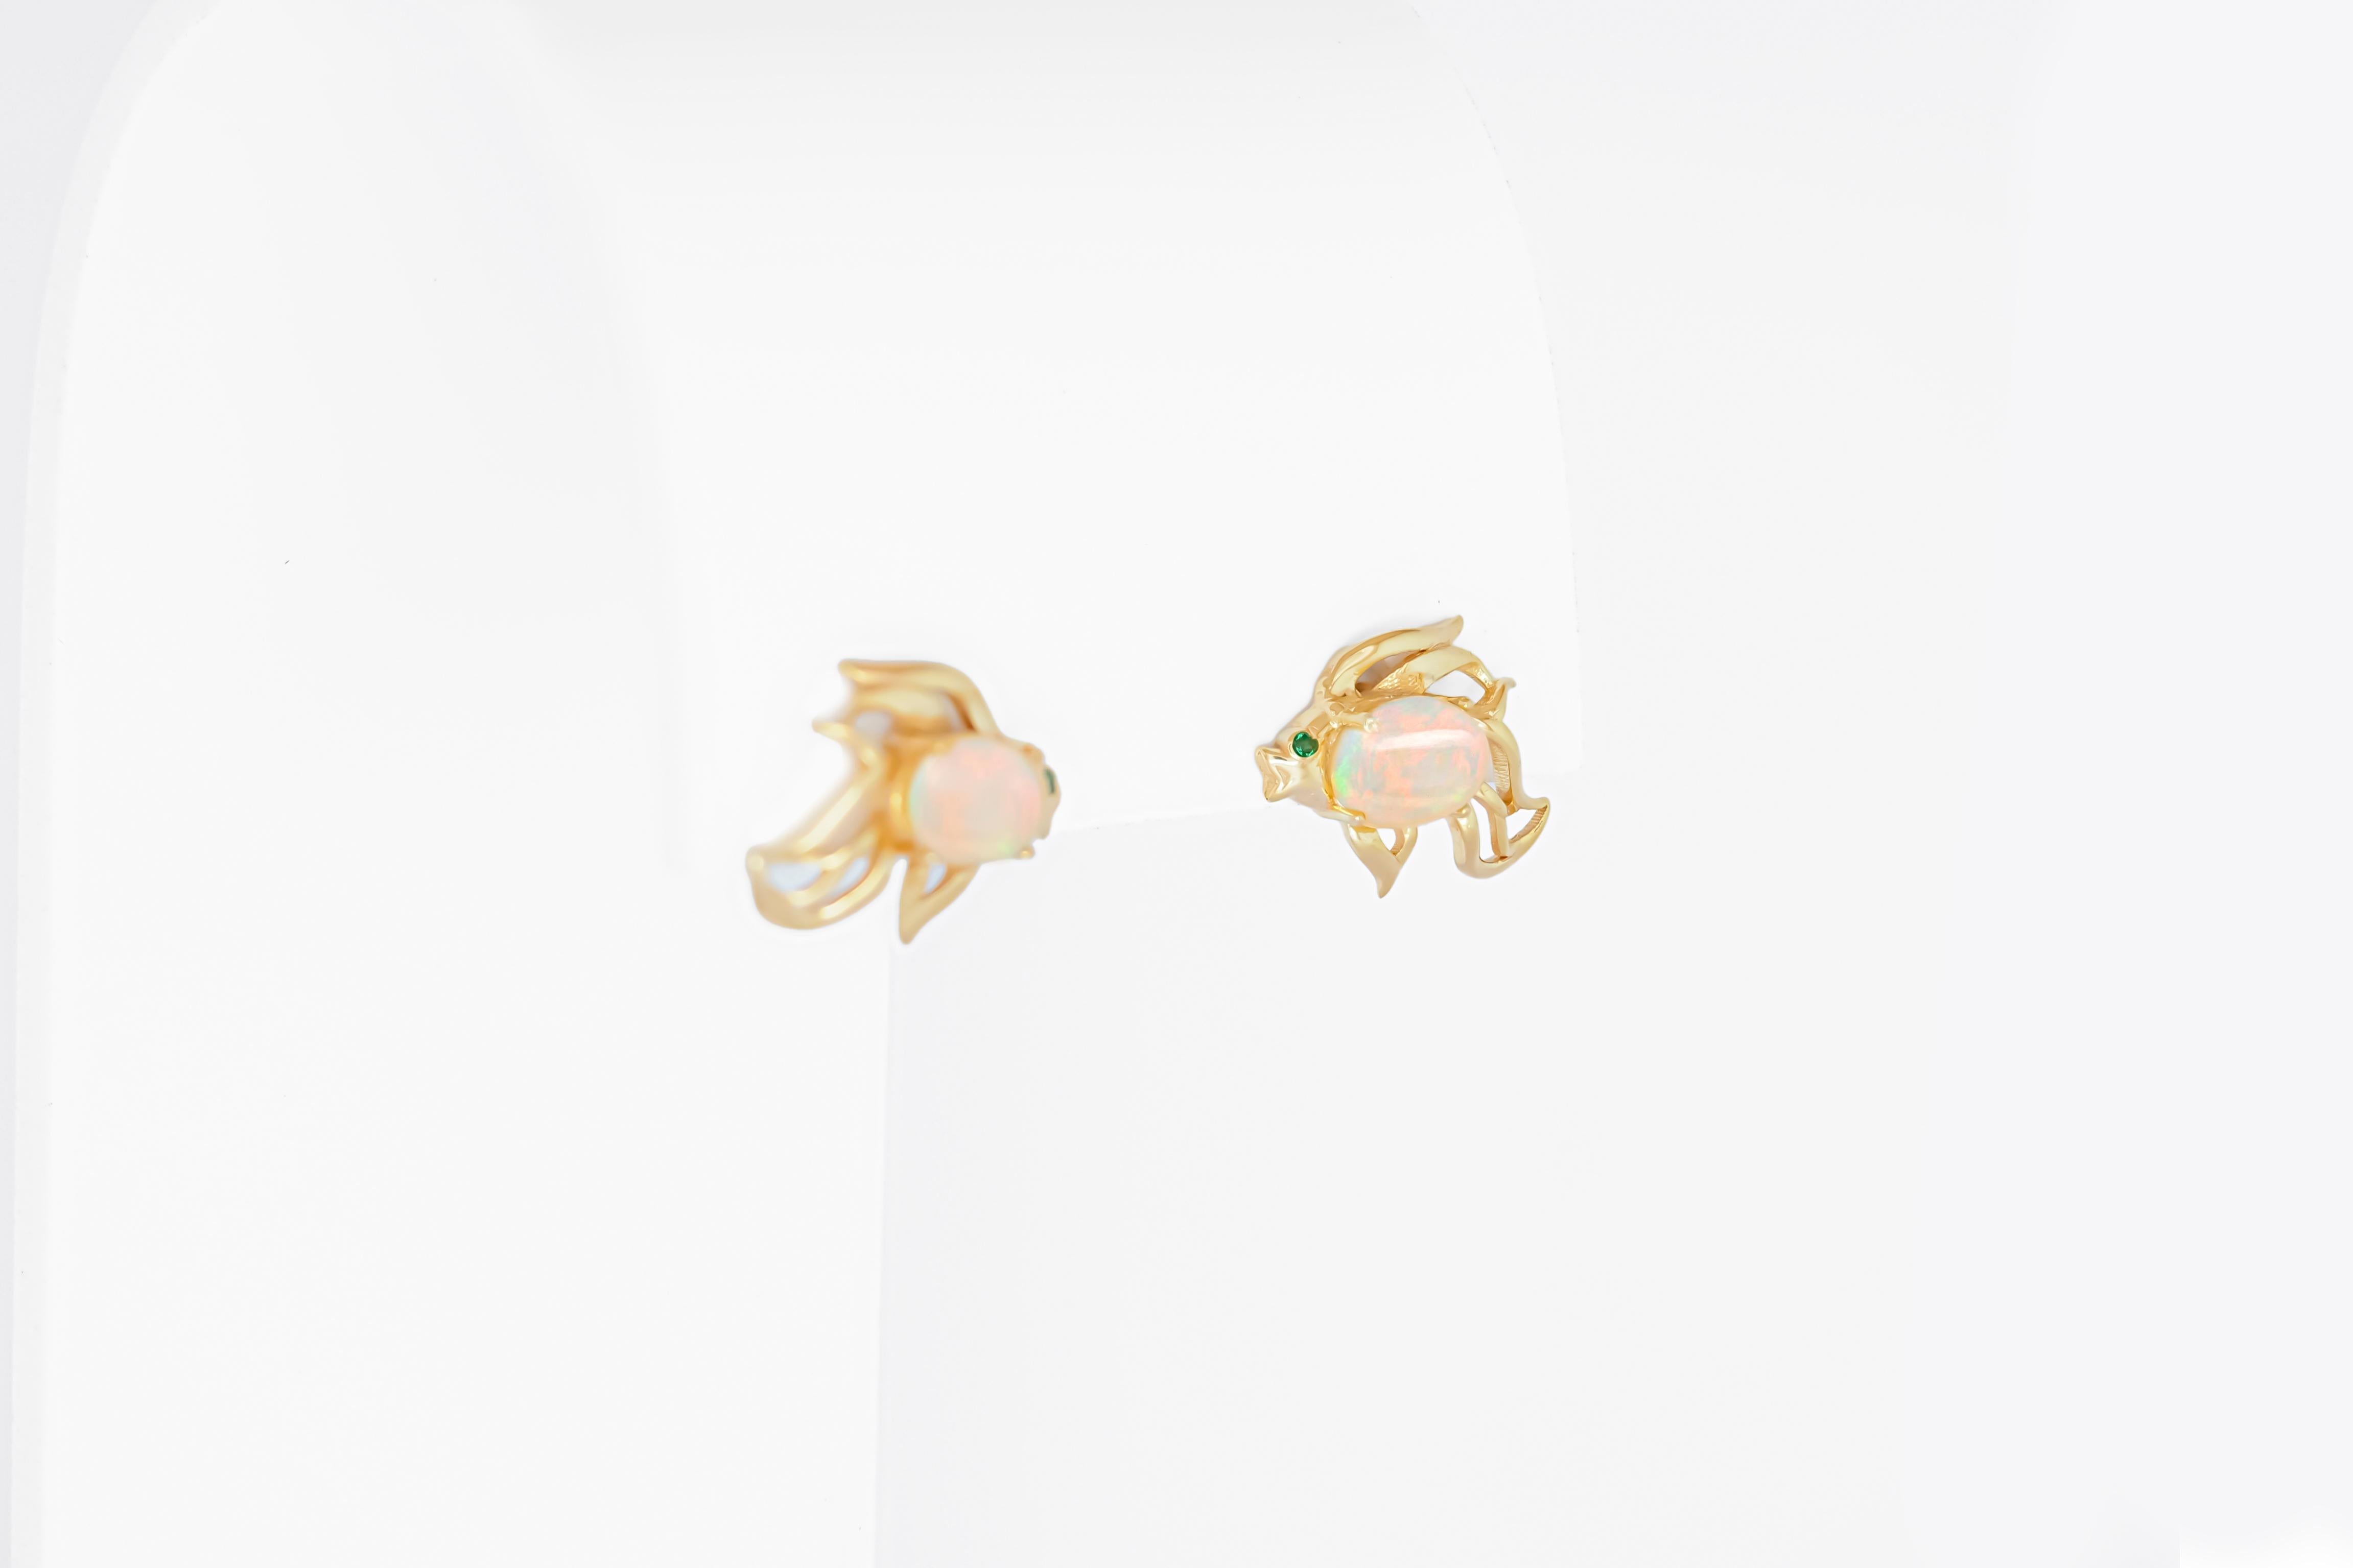 Cabochon 14k gold Fish earrings studs set in 14k gold. For Sale